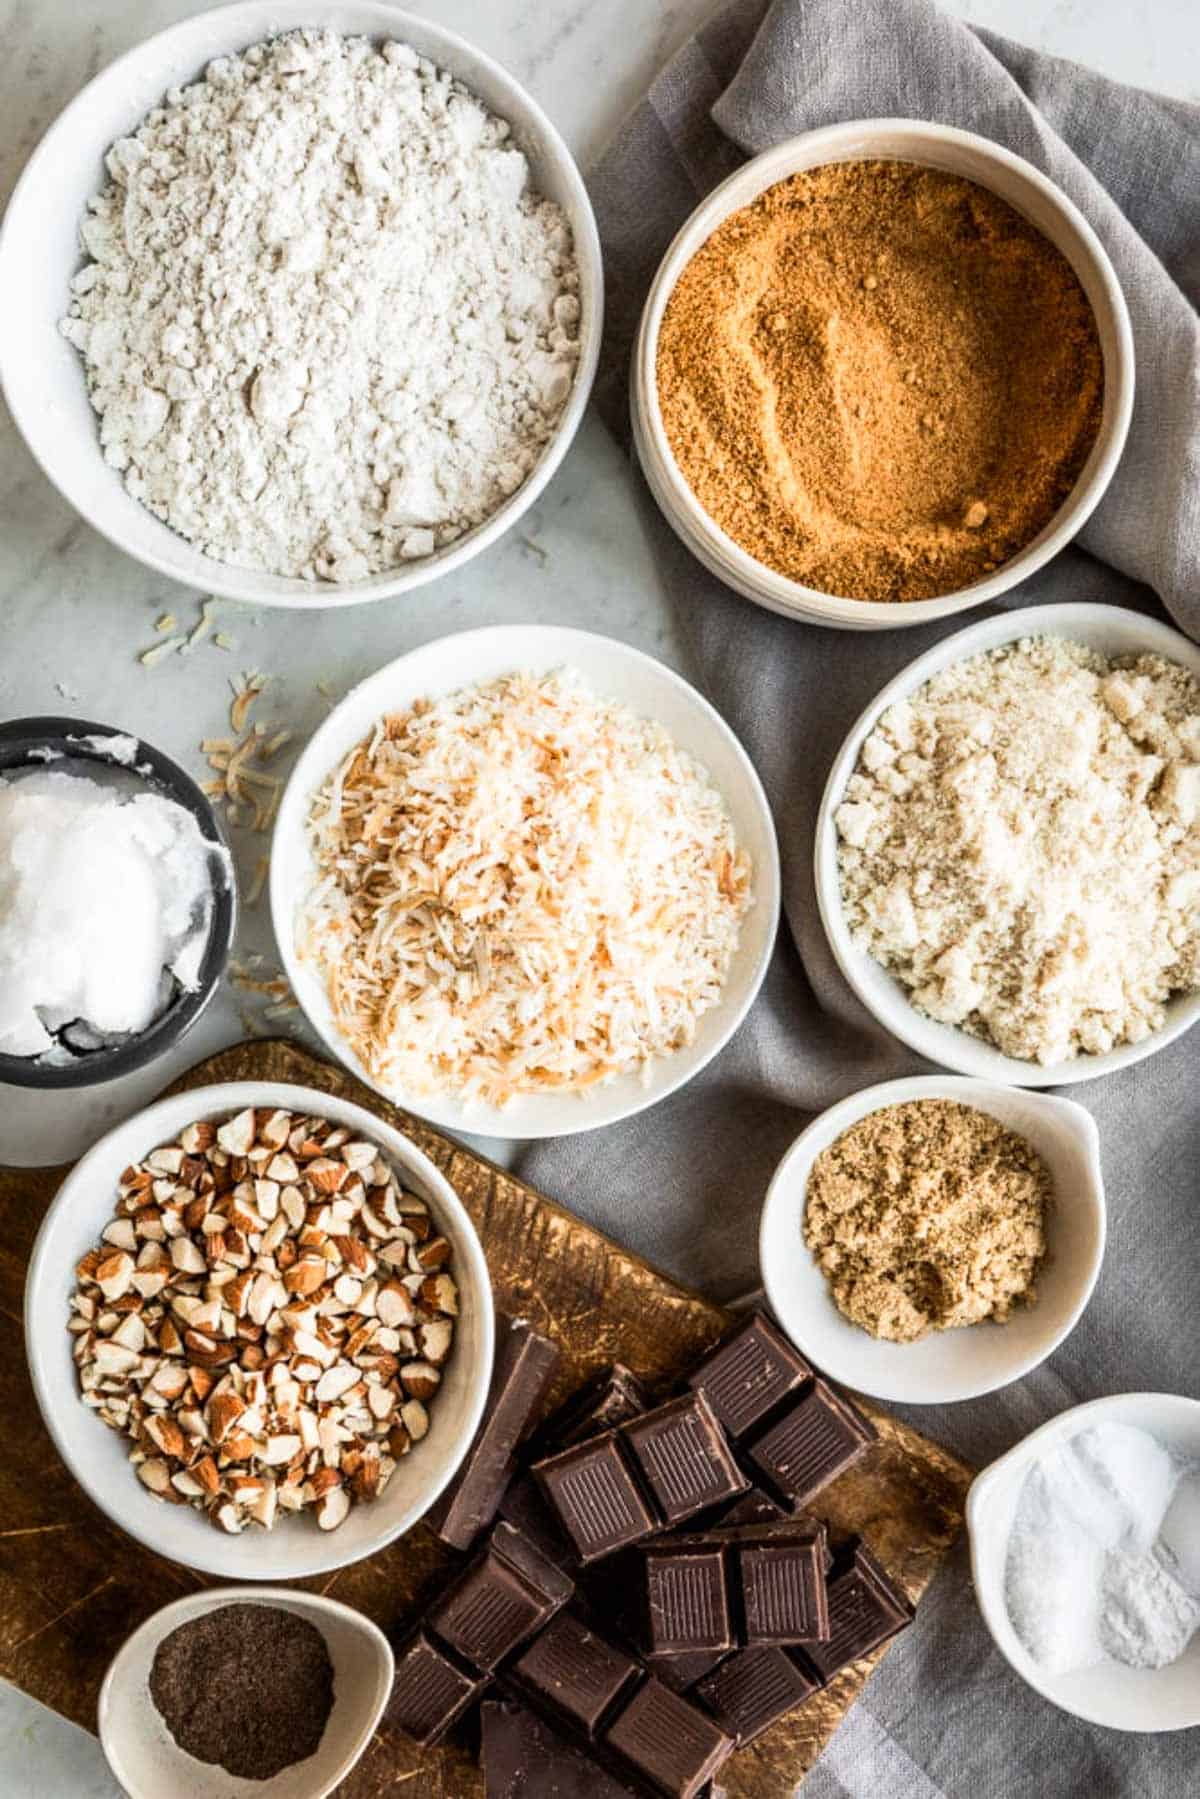 Ingredients for cookies including gluten-free flour, coconut sugar, almond flour, coconut flakes, coconut oil, chopped almonds, flaxseed, chocolate squares and sea salt.